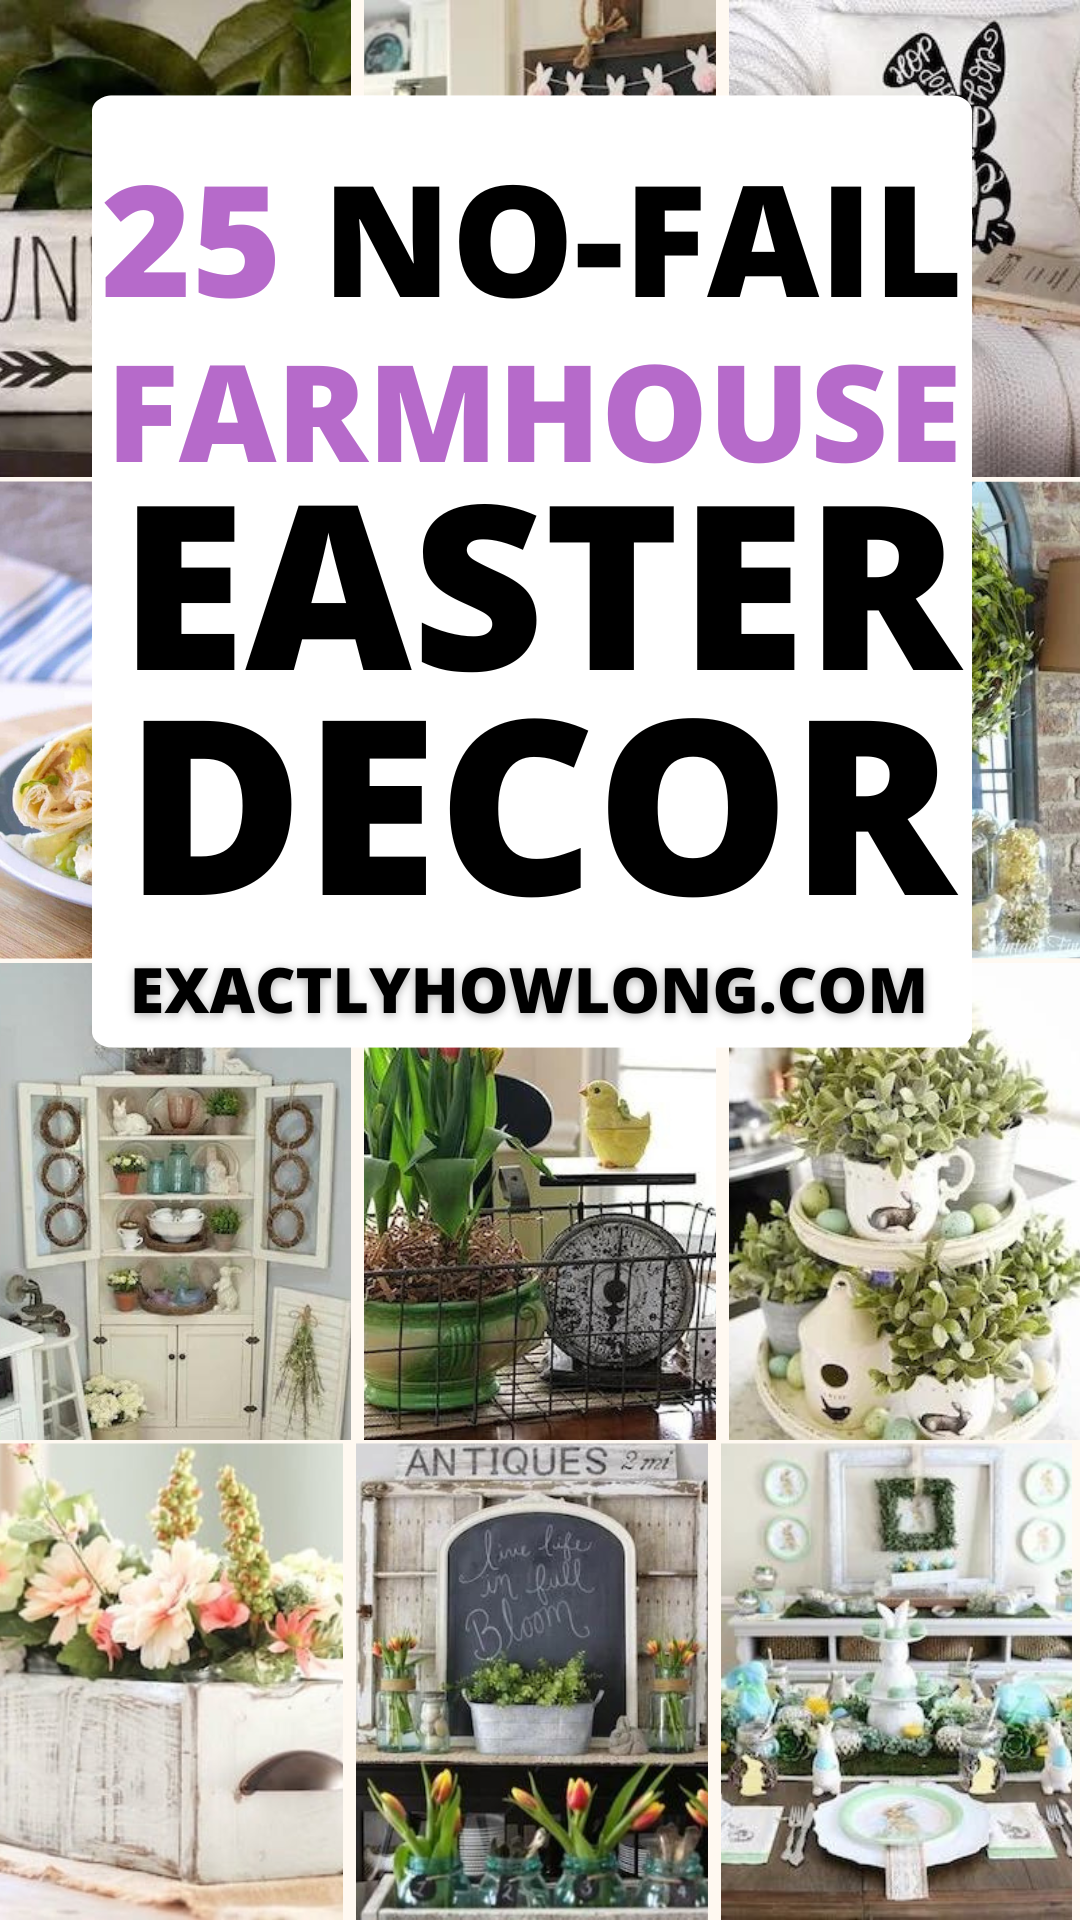 Easter decor ideas using Dollar Tree items for a farmhouse look you can create yourself.